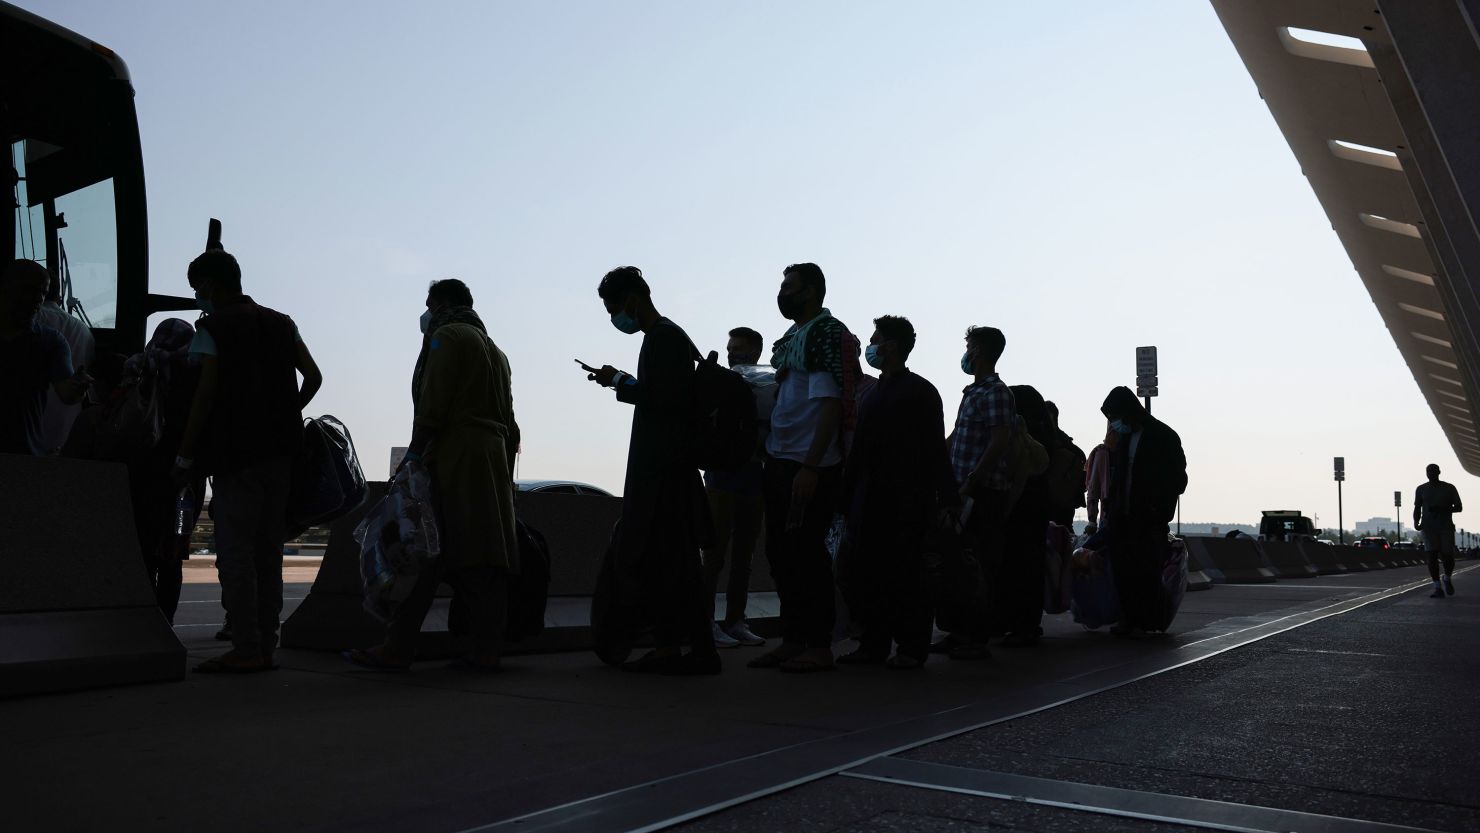 People who were evacuated from Kabul, Afghanistan, wait to board a bus at Washington Dulles International Airport in Virginia that will take them to a refugee processing center, on Wednesday, August 25, 2021.